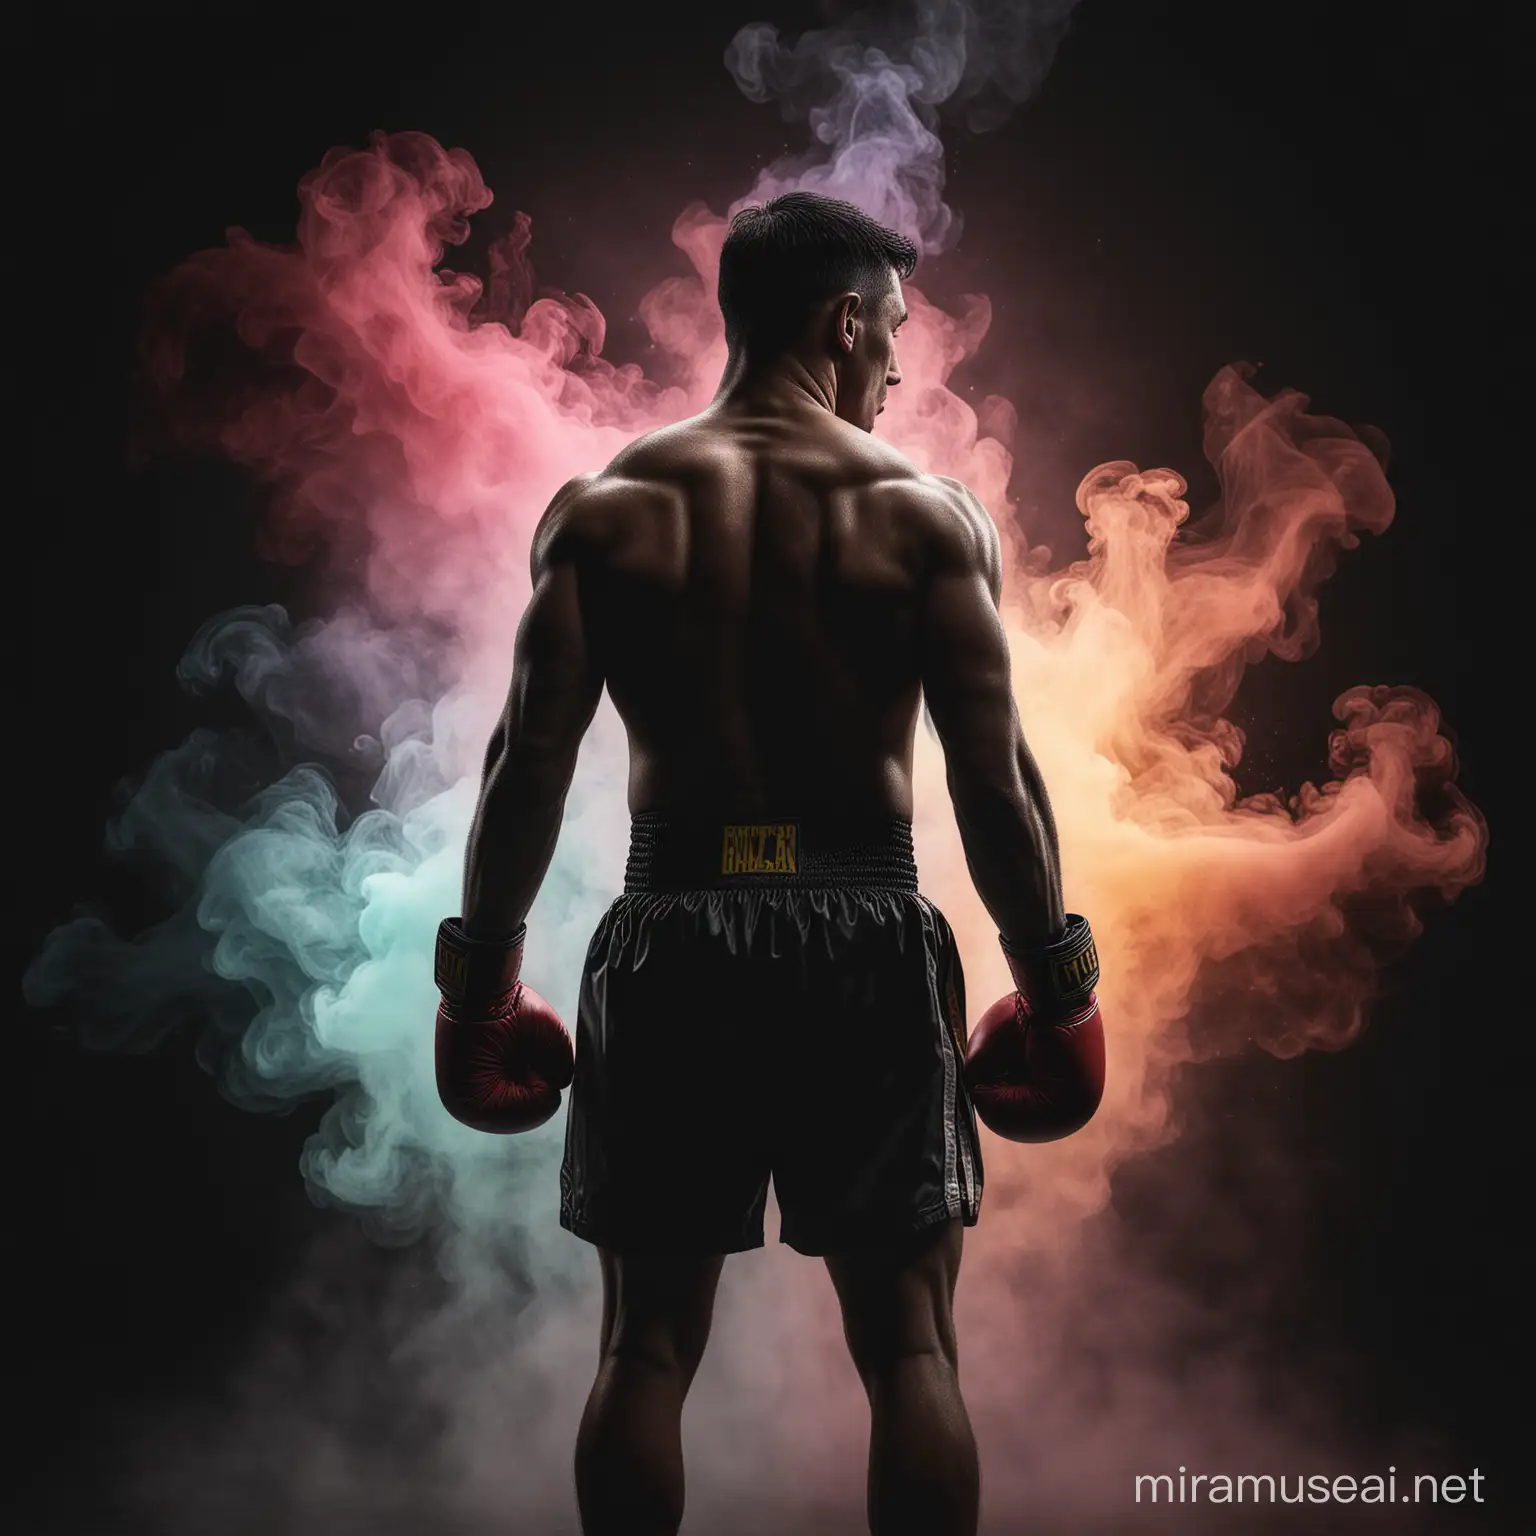 far-away silhuette of boxer's back facing the camera. He's far away enough to see his boxing gloves. He's looking back at the camera over his shoulder. There is colorful smoke in the black background. style is dark, hyperrealistic, noir.
